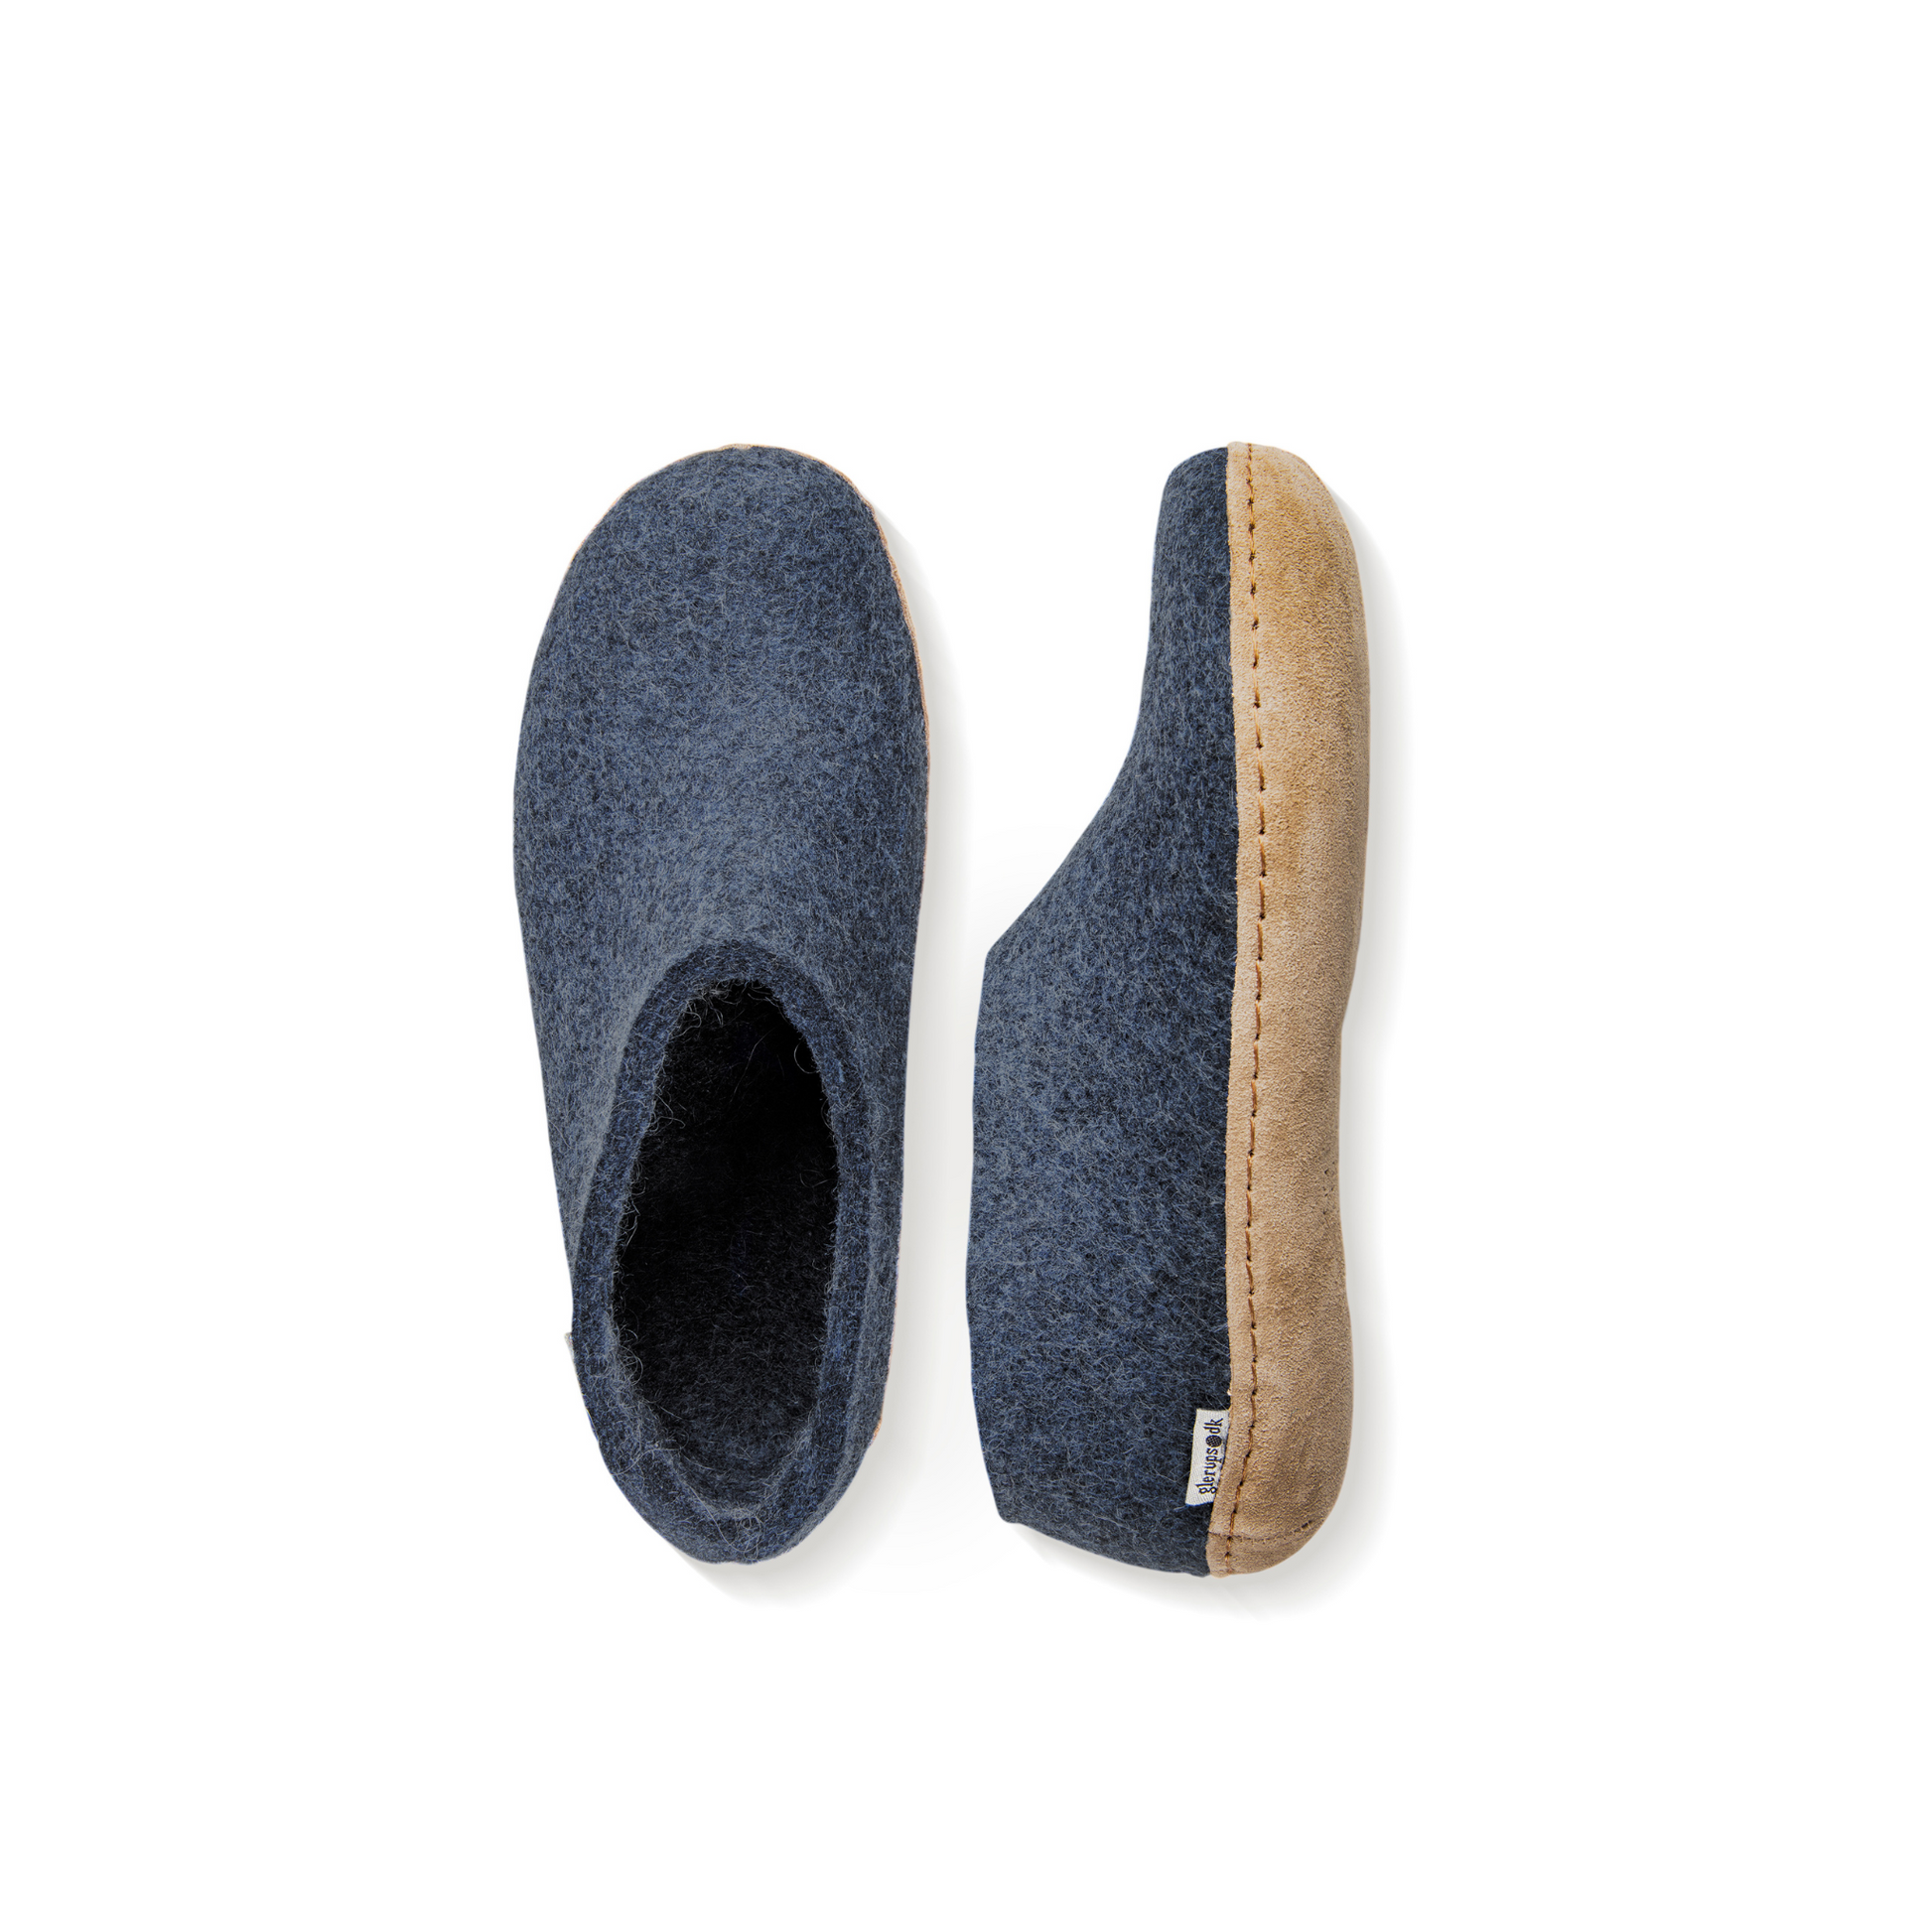 An overhead view of two dark denim blue felted wool tall-back slippers. One is pictured straight on, showing the top face of the slipper, while the other lays on its side, showing the profile with tan leather sole with a row of stitching.